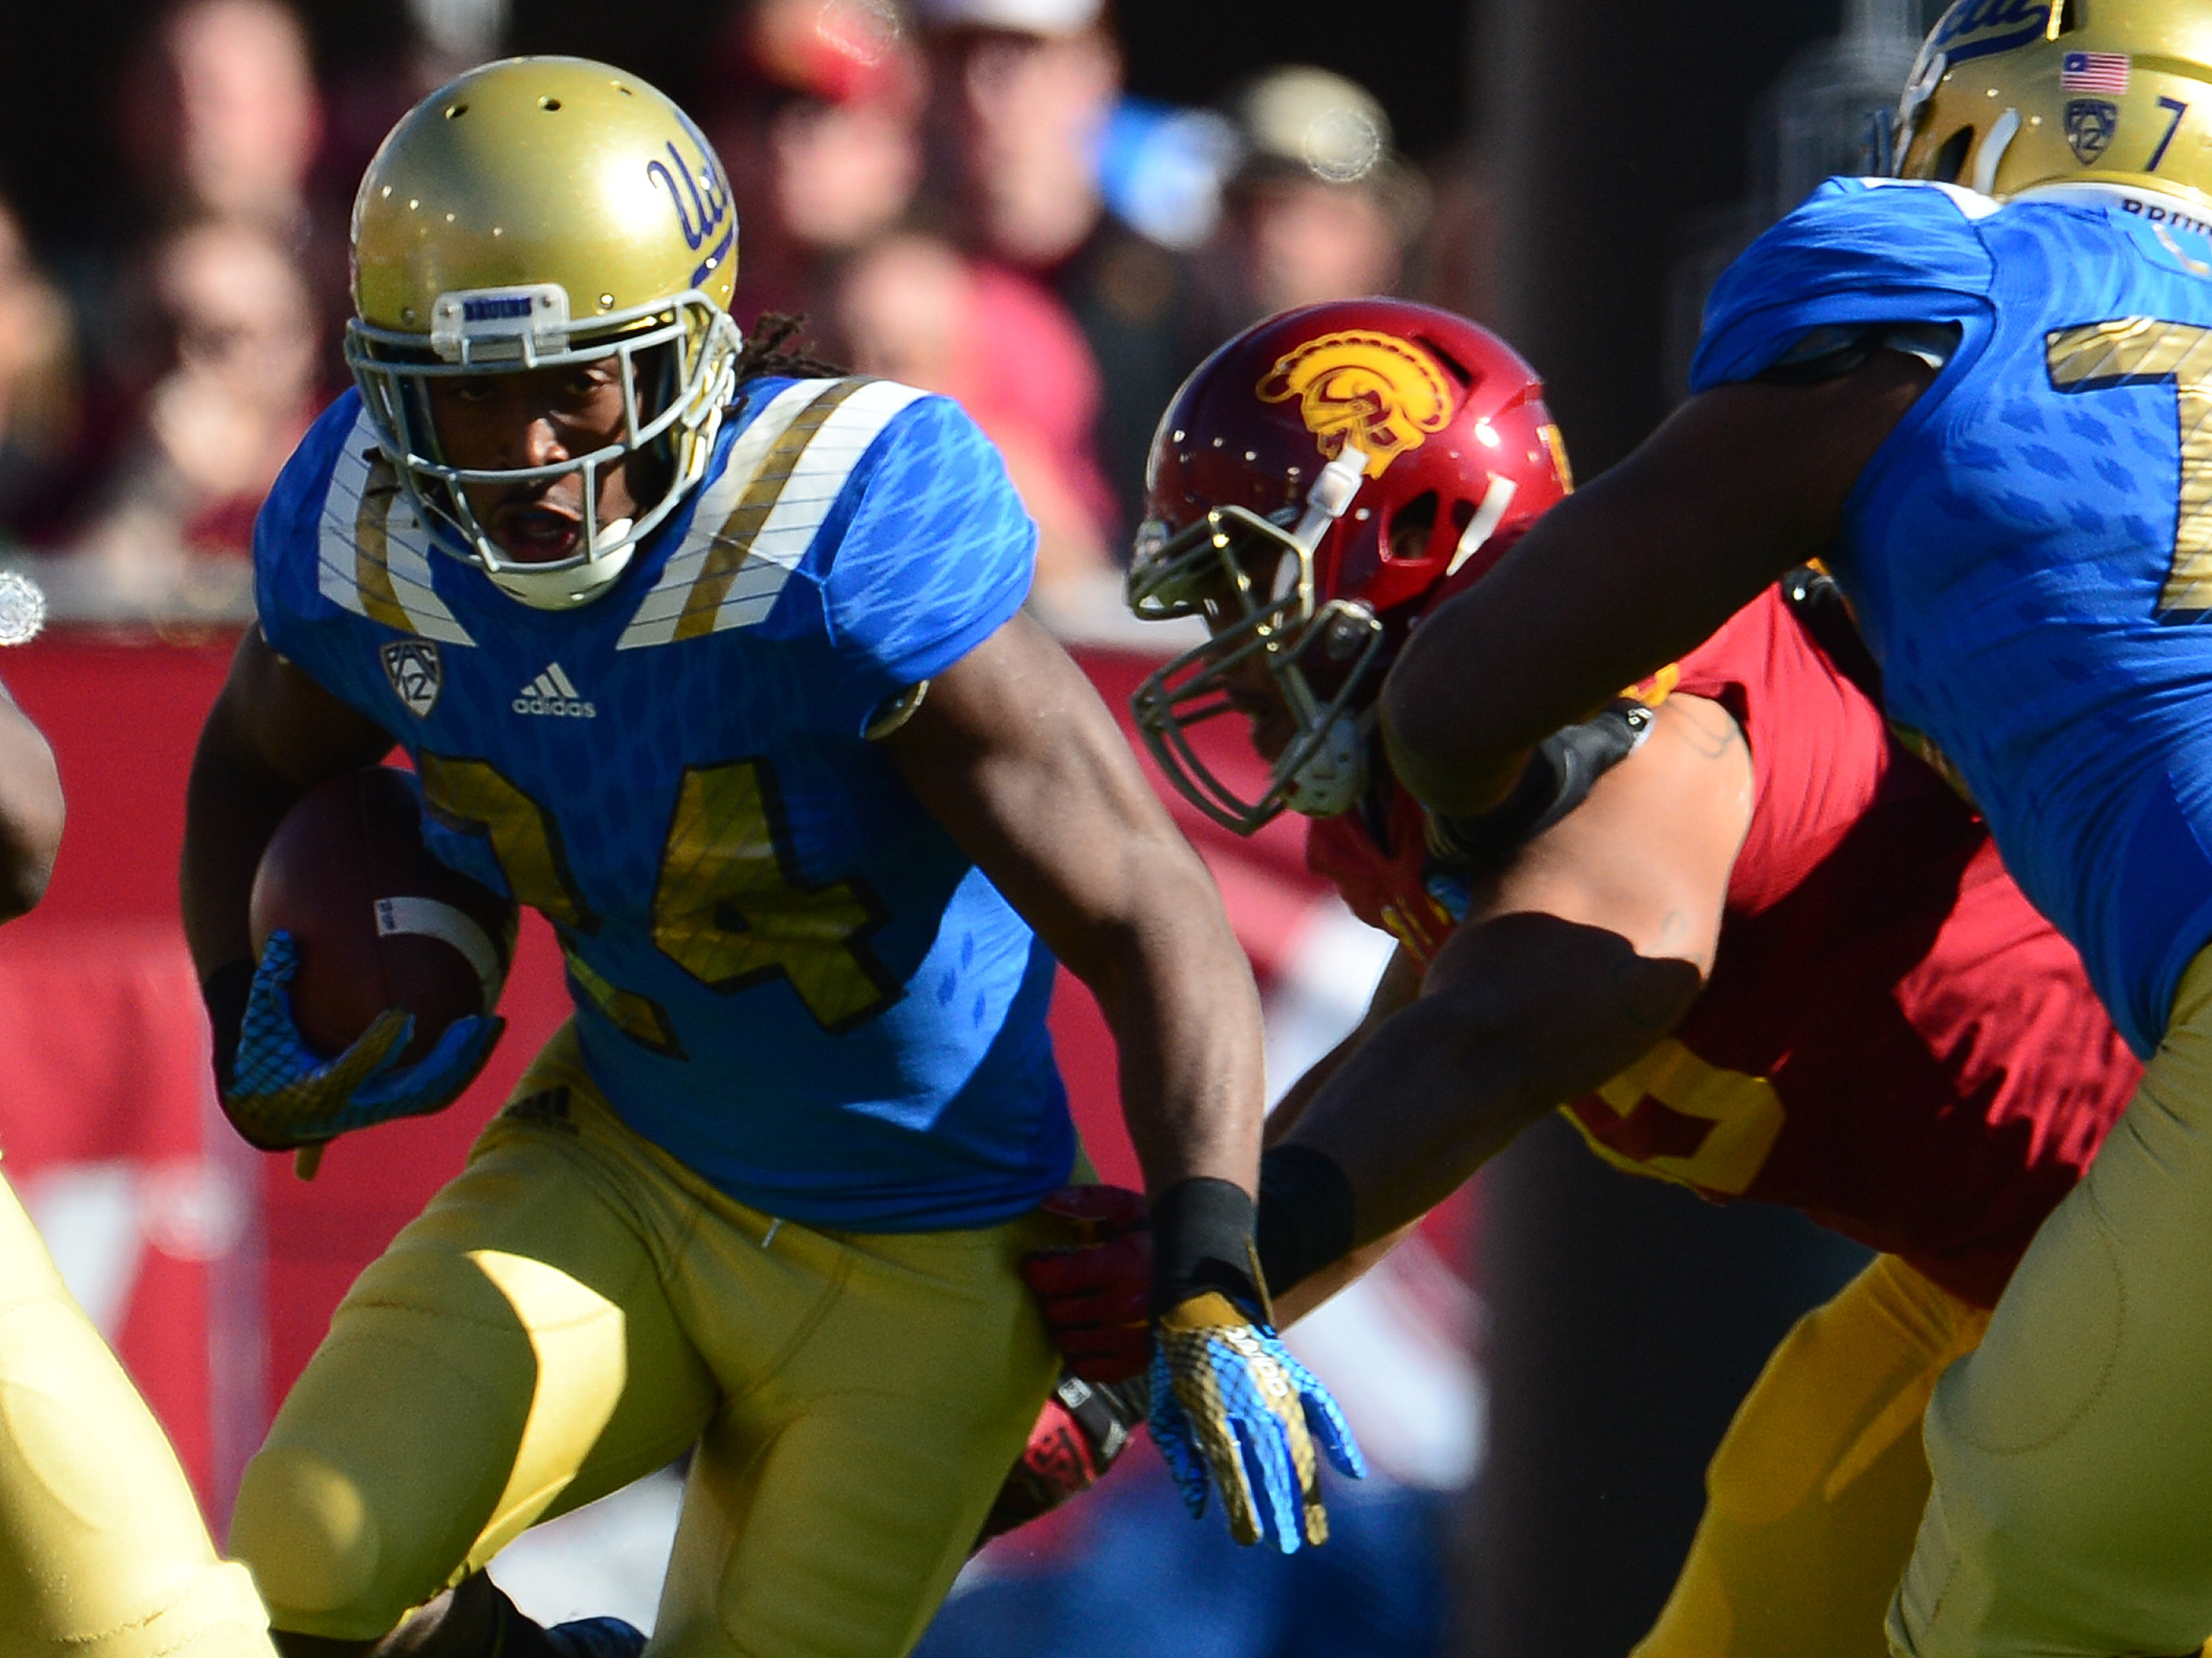 UCLA running back Paul Perkins (24) runs for yardage against Southern California during the first half of an NCAA college football game in the Los Angeles Memorial Coliseum in Los Angeles, on Saturday, Nov. 28, 2015. (Photo by Keith Birmingham/ Pasadena Star-News)